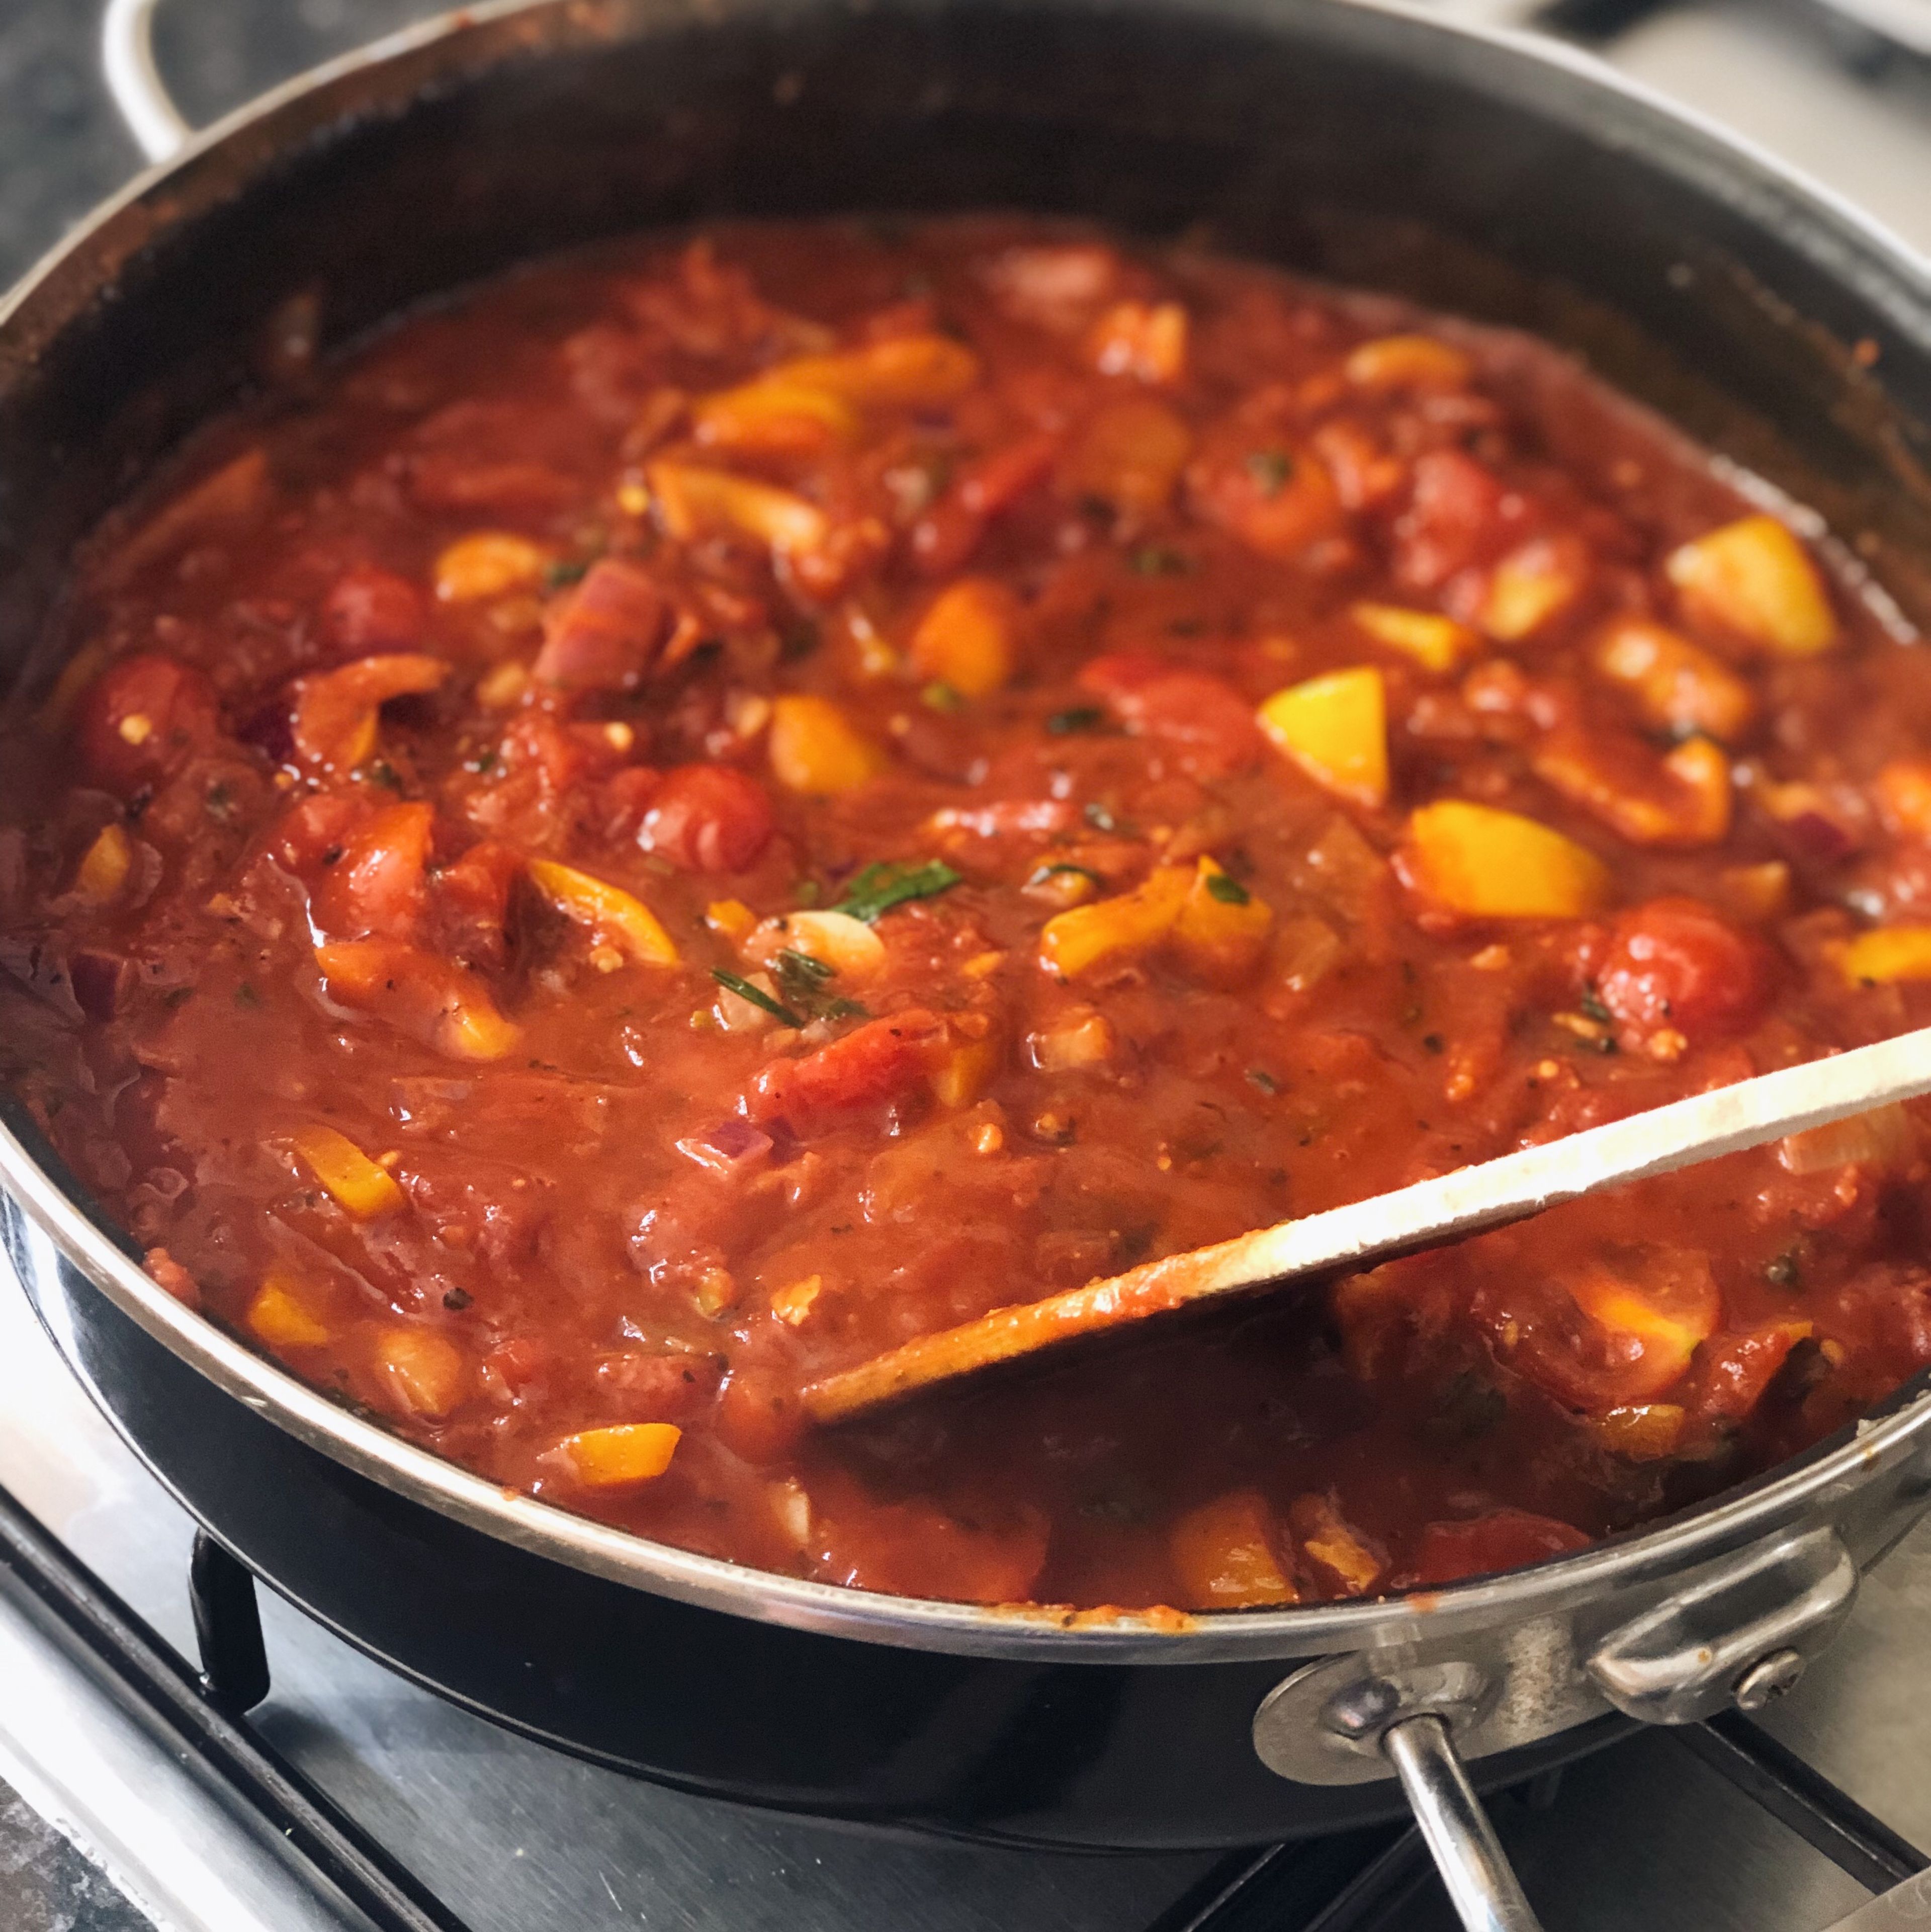 Pour in tinned chopped tomatoes. Add splash of water to each empty tin and pour in the pan. Add soy sauce, worcestershire sauce (I use Biona Organic vegan Worcestershire), lemon sugar and sriracha sauce. Simmer with lid on for 10 minutes.